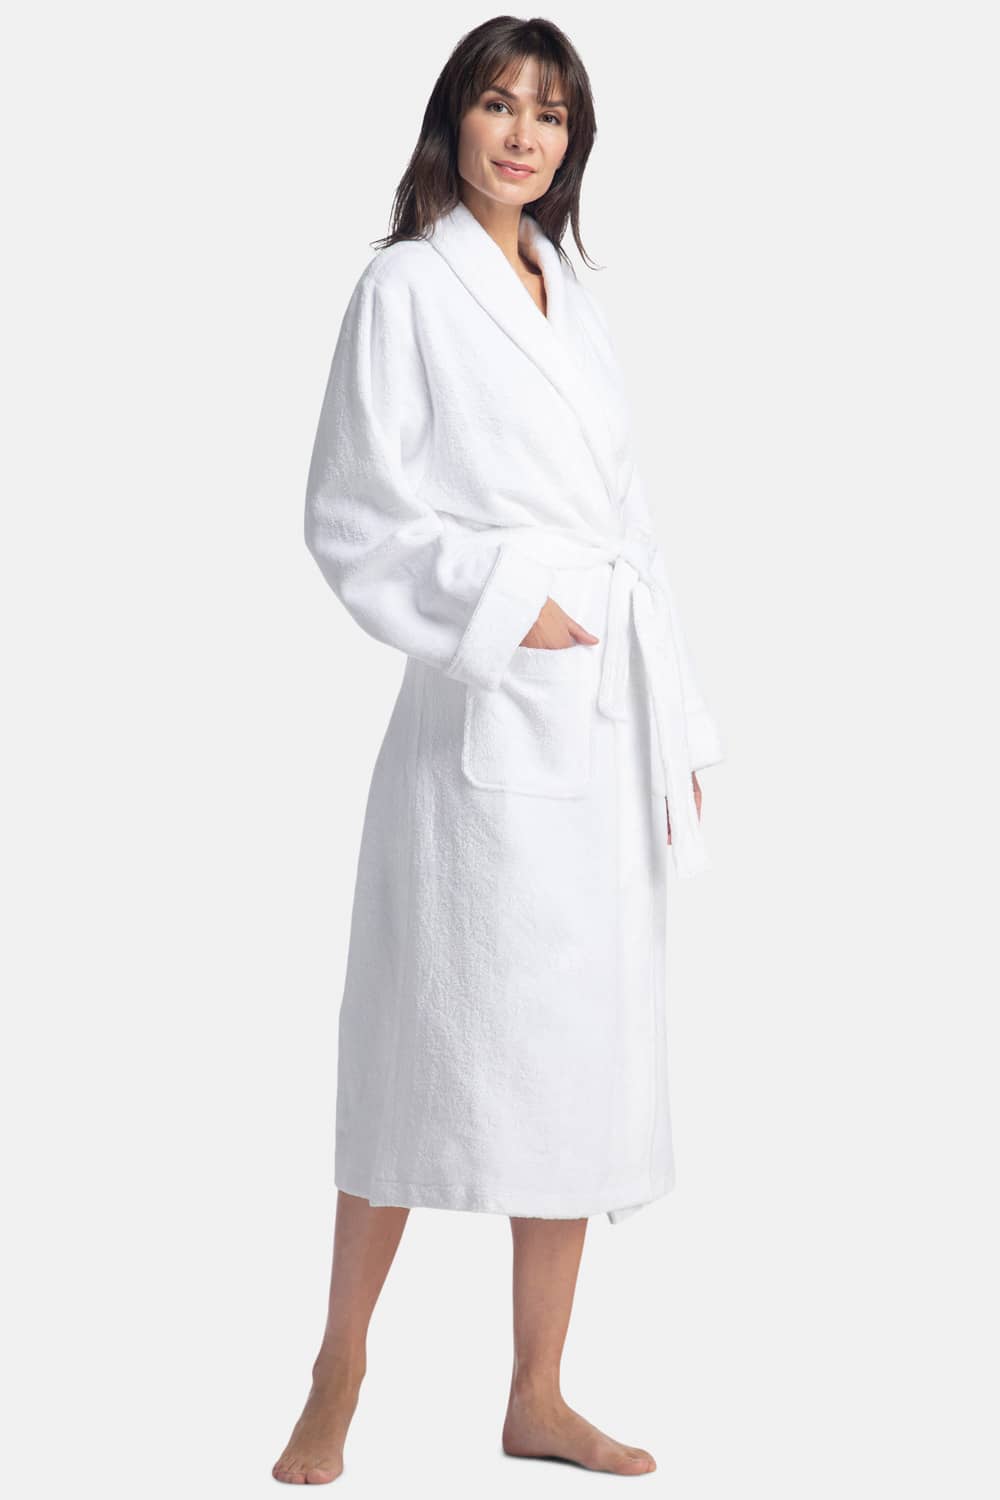 Women's Premier Turkish-Style Full Length Terry Cloth Spa Robe Womens>Spa>Robe Fishers Finery White S/M 